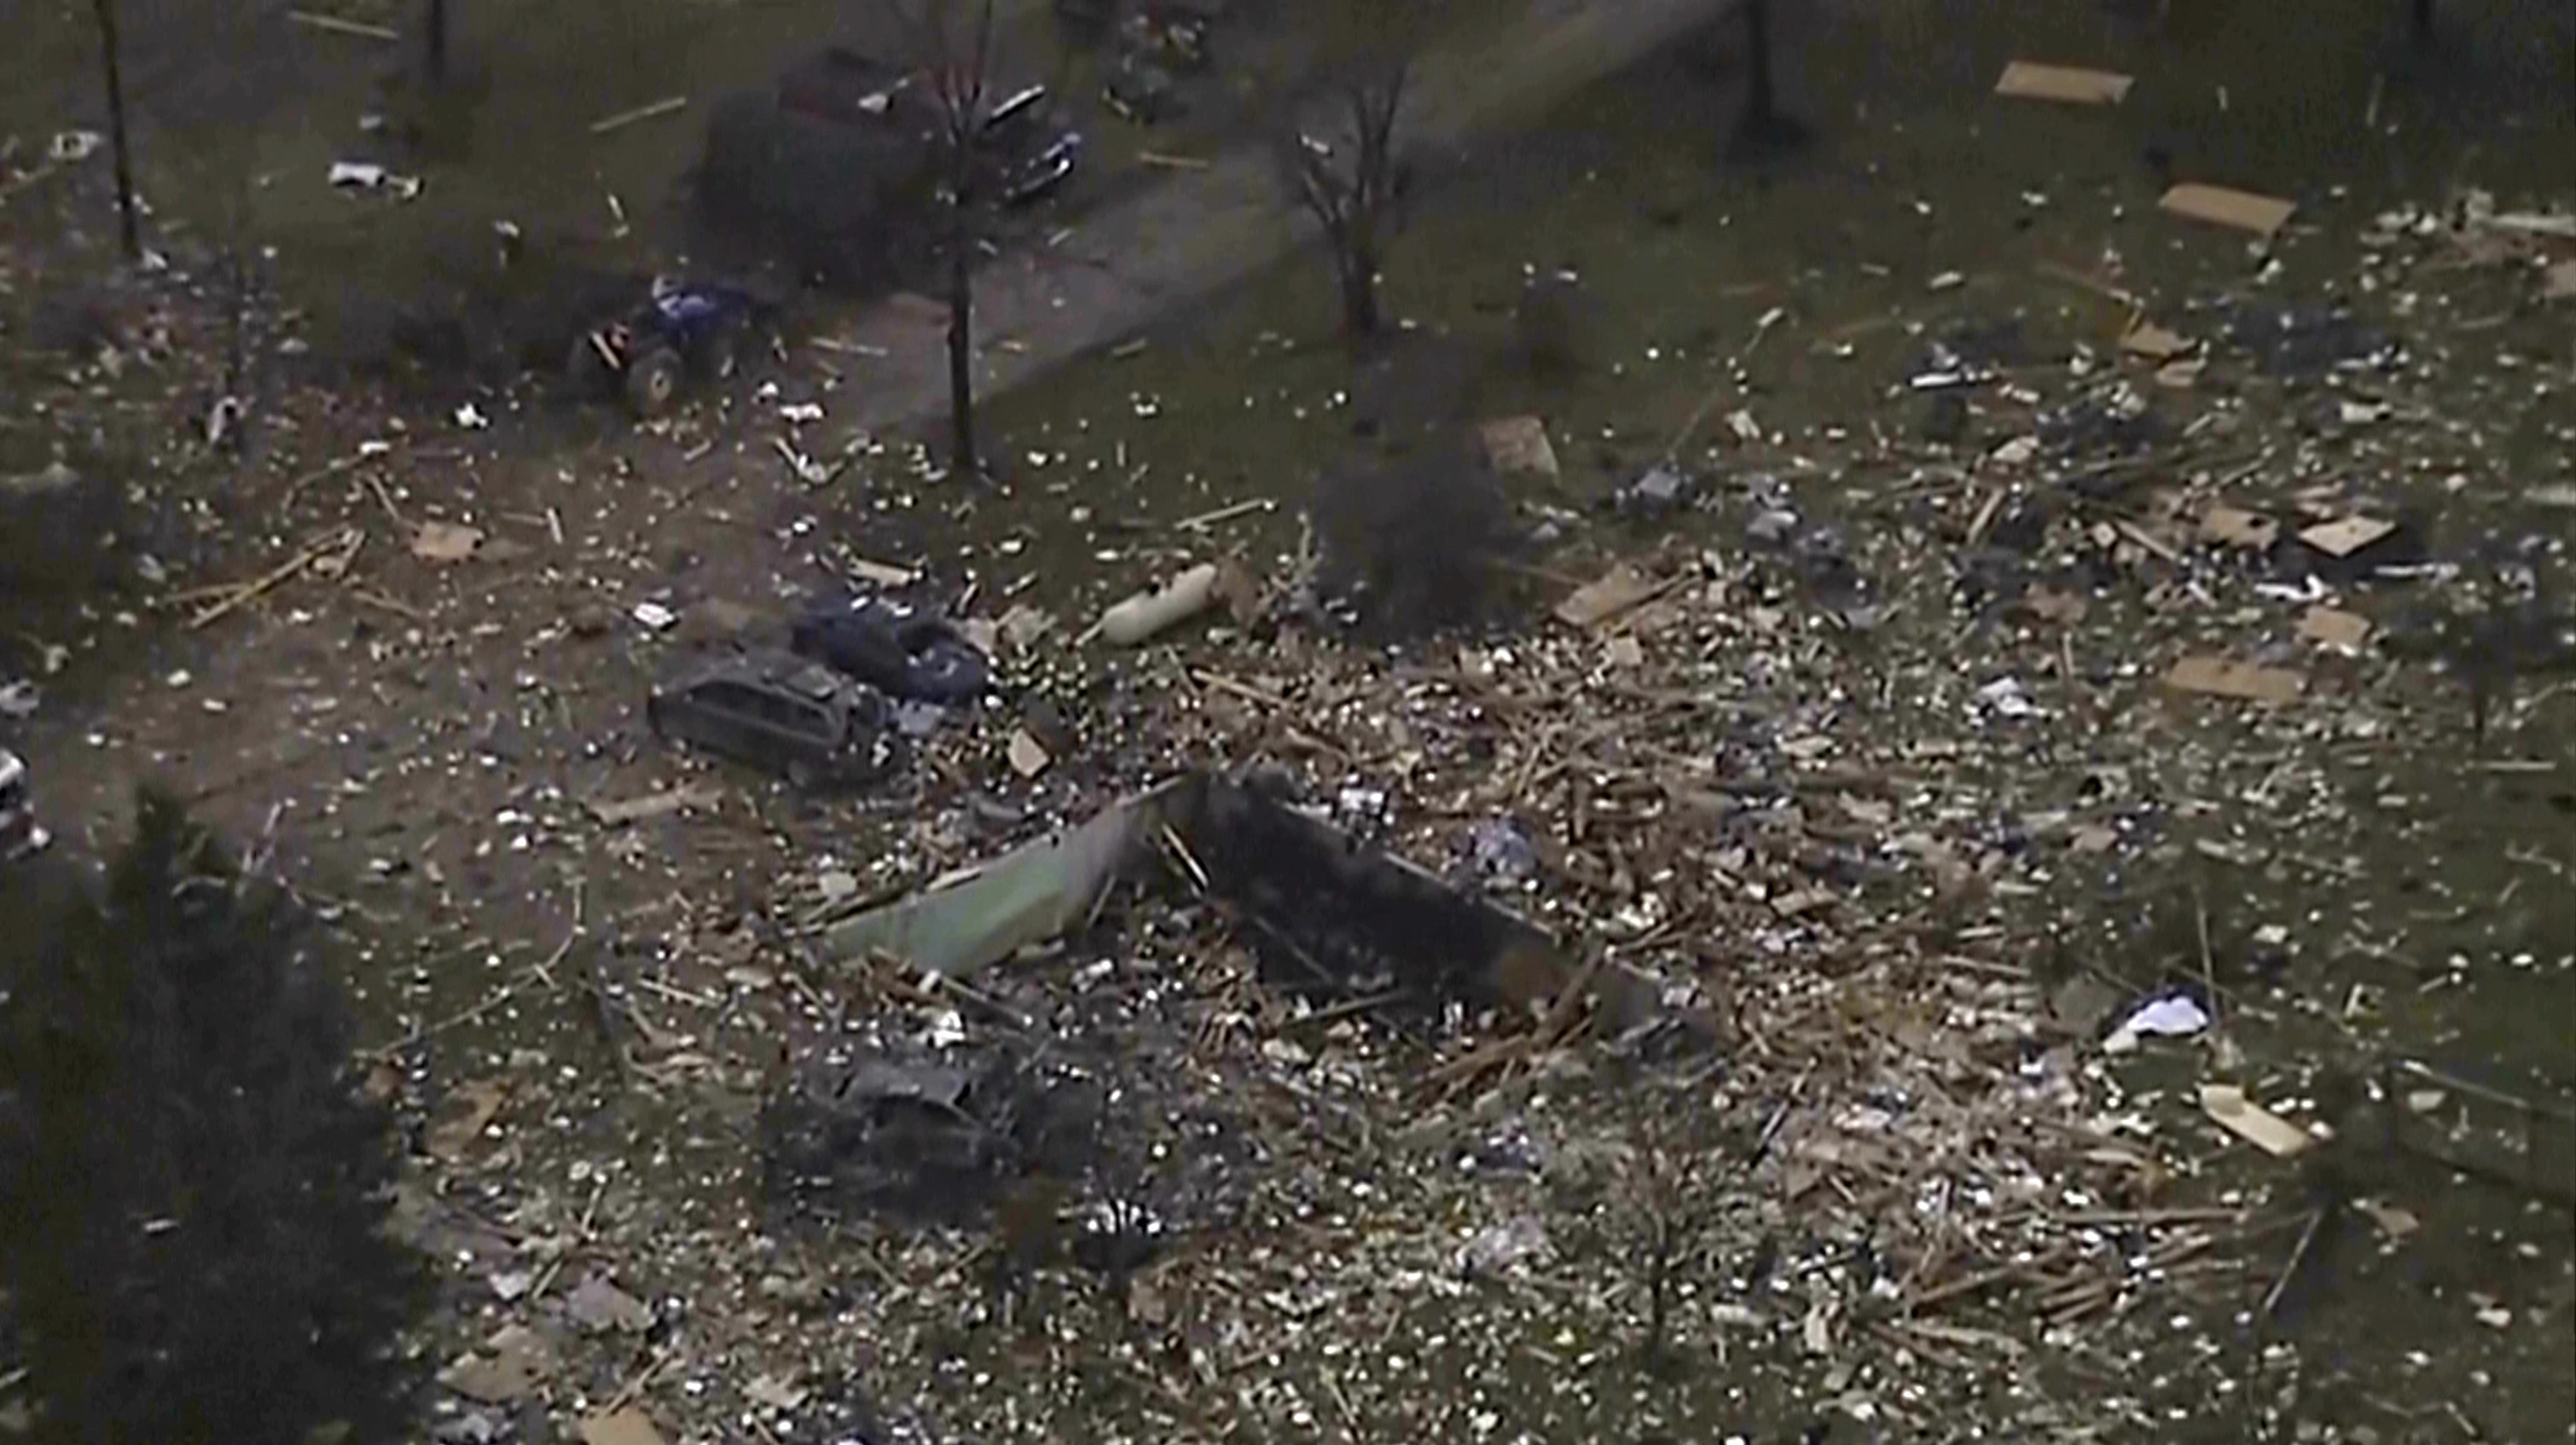 Michigan Home Explosion Heard for Miles Kills 4 and Injures 2, Police Say